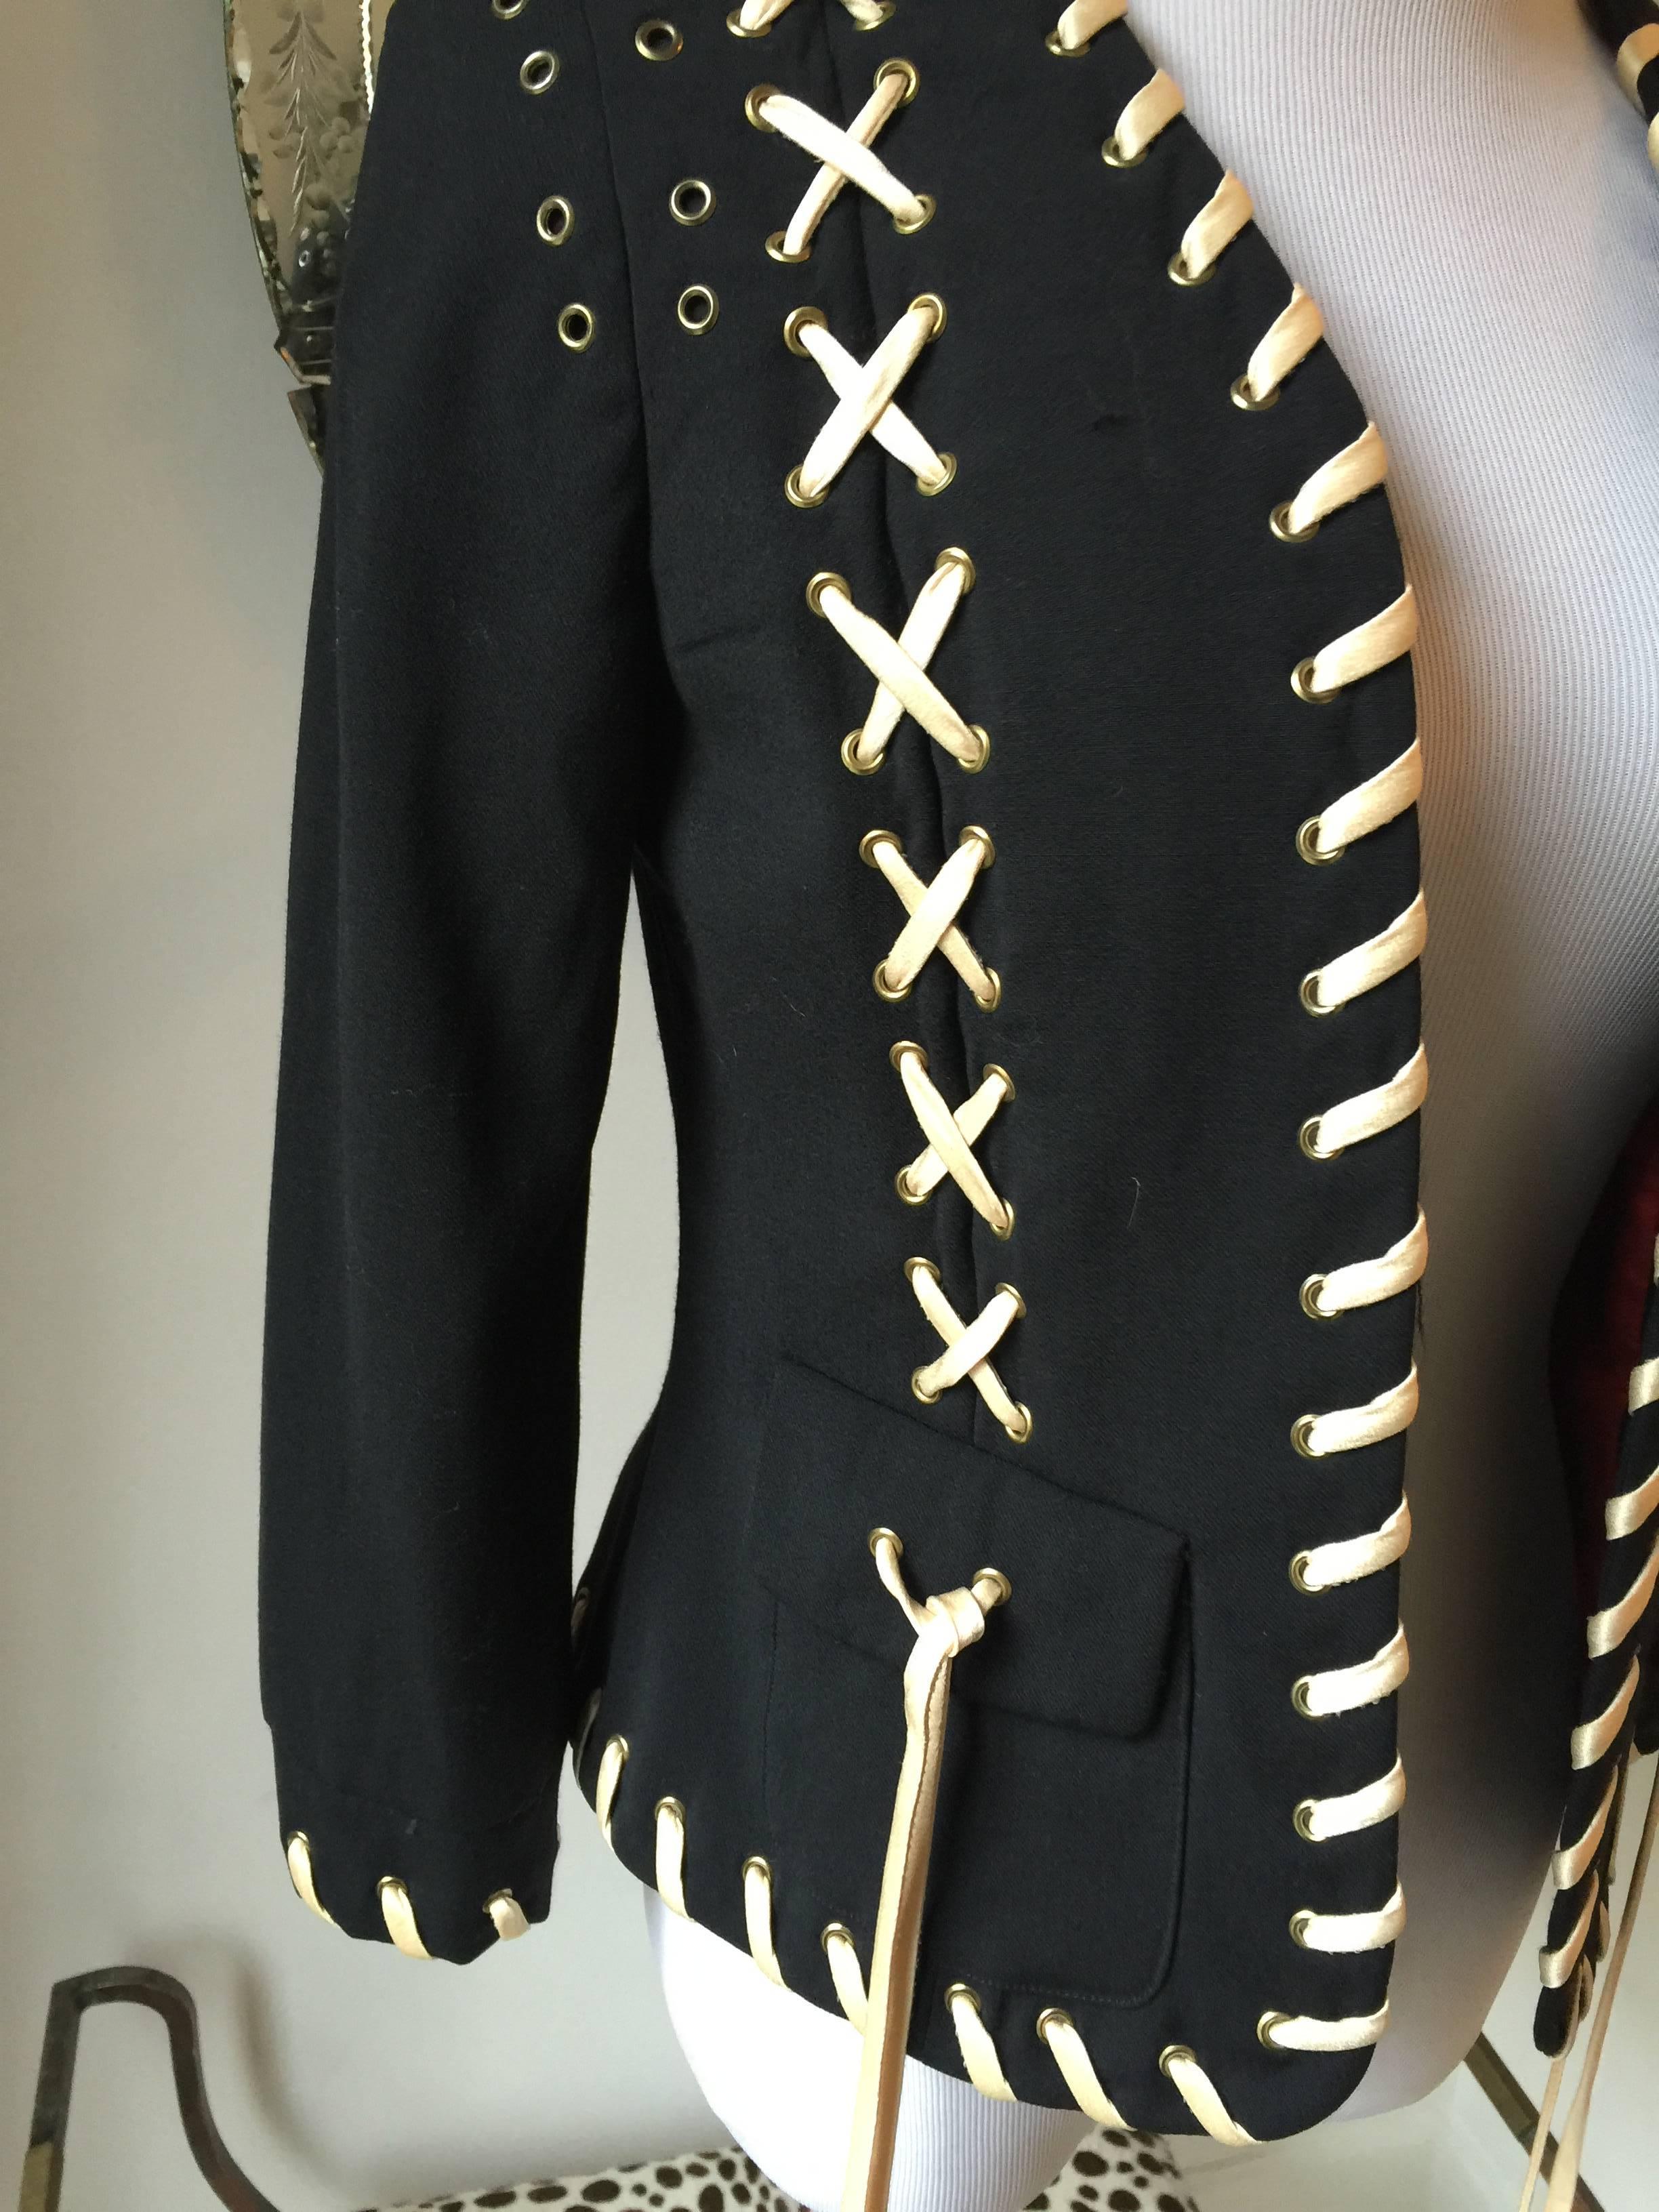 A very chic and cool little jacket by Moschino...
featuring lace up dtails....
wear with jeans and boots or dress it up on a black dress or skirt...